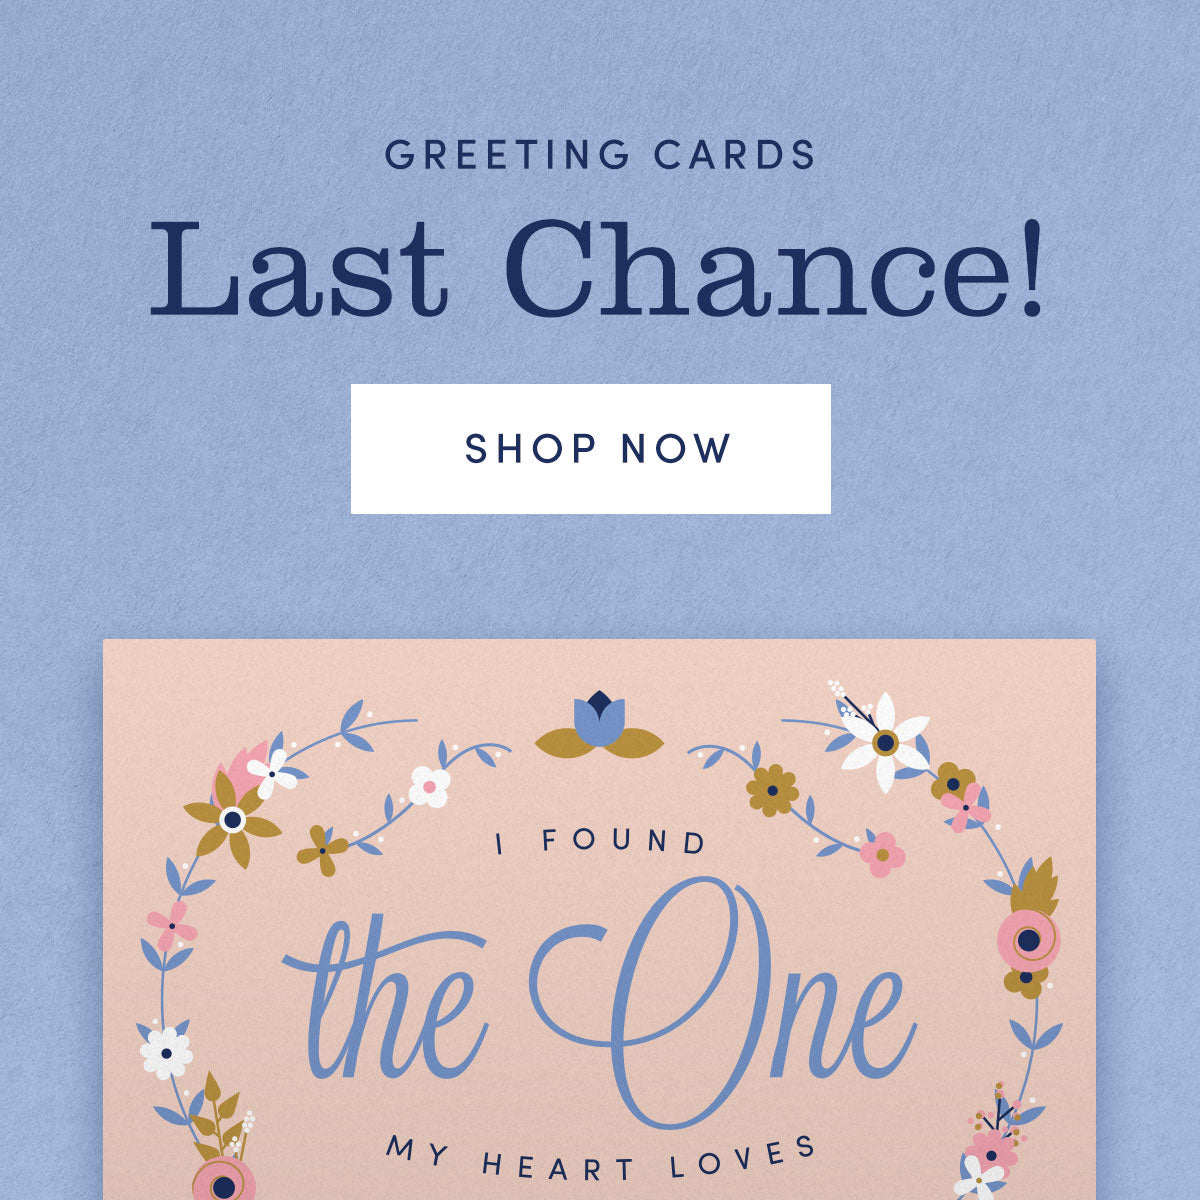 Last Chance greeting cards for only $1! Shop now.